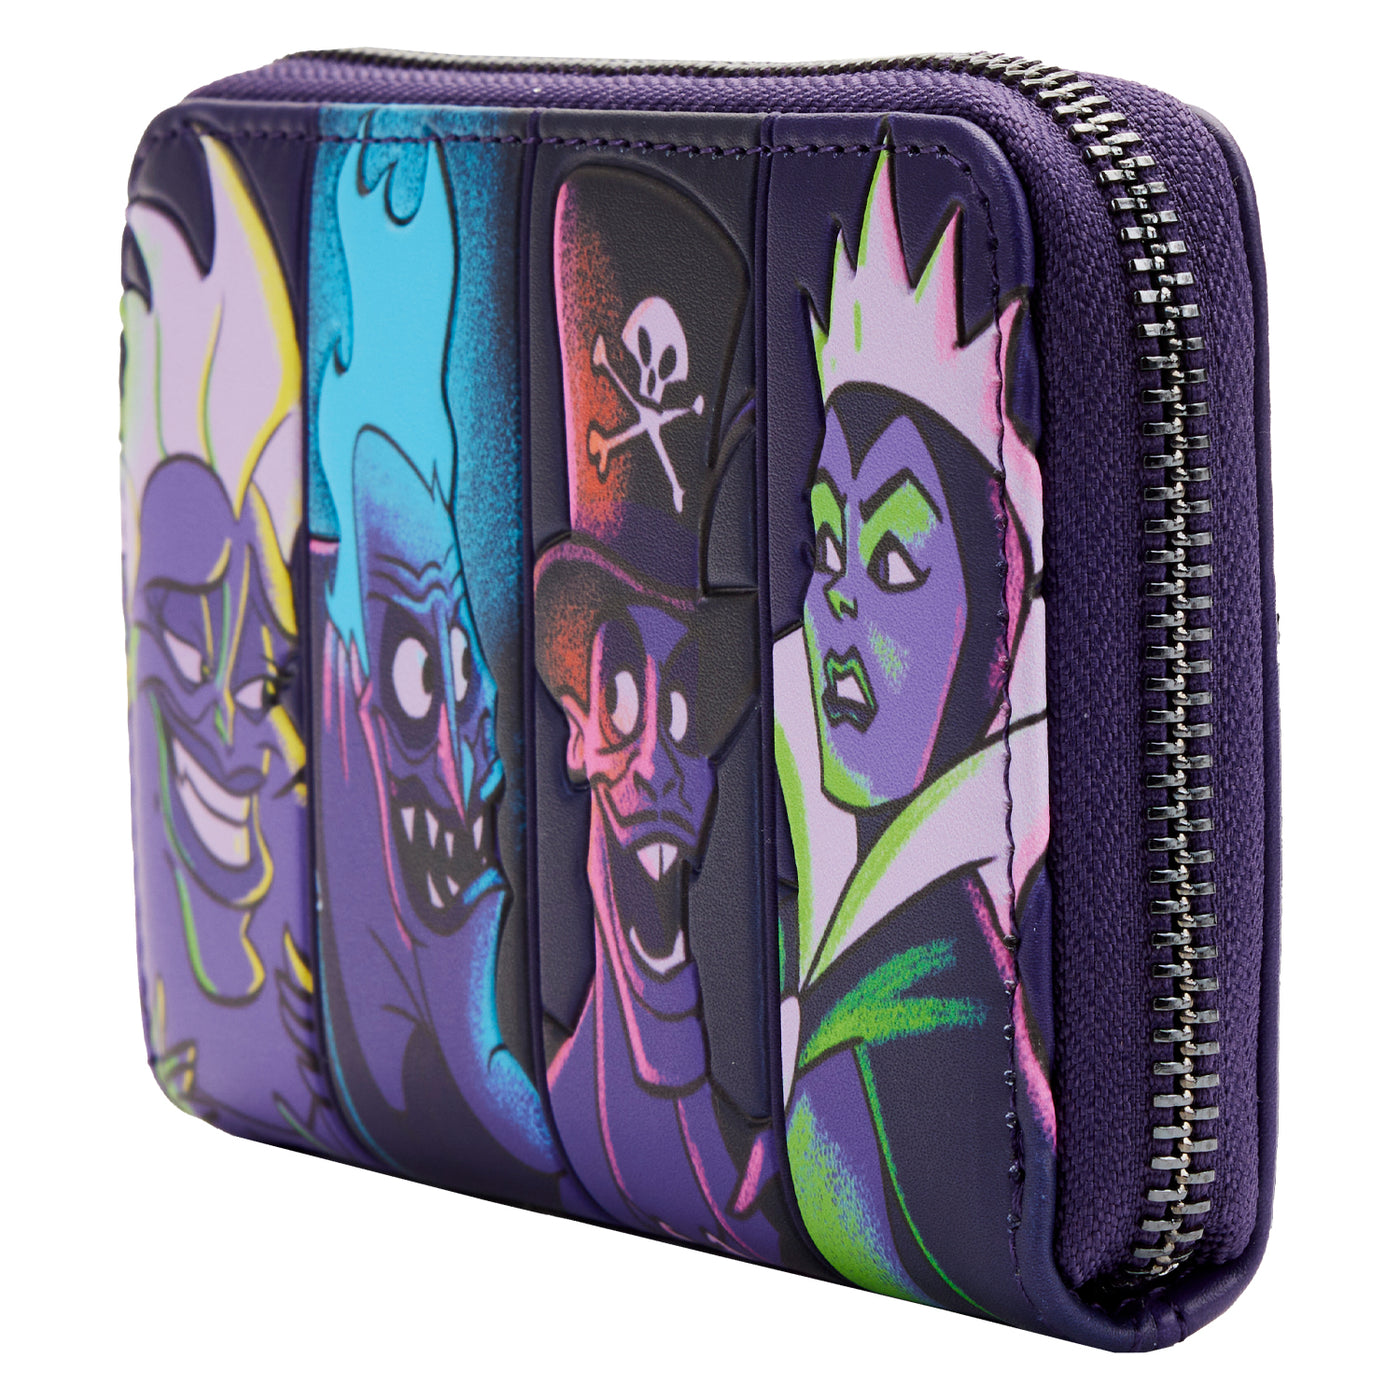 Loungefly, Bags, Loungefly Disney Maleficent Villains Wallet